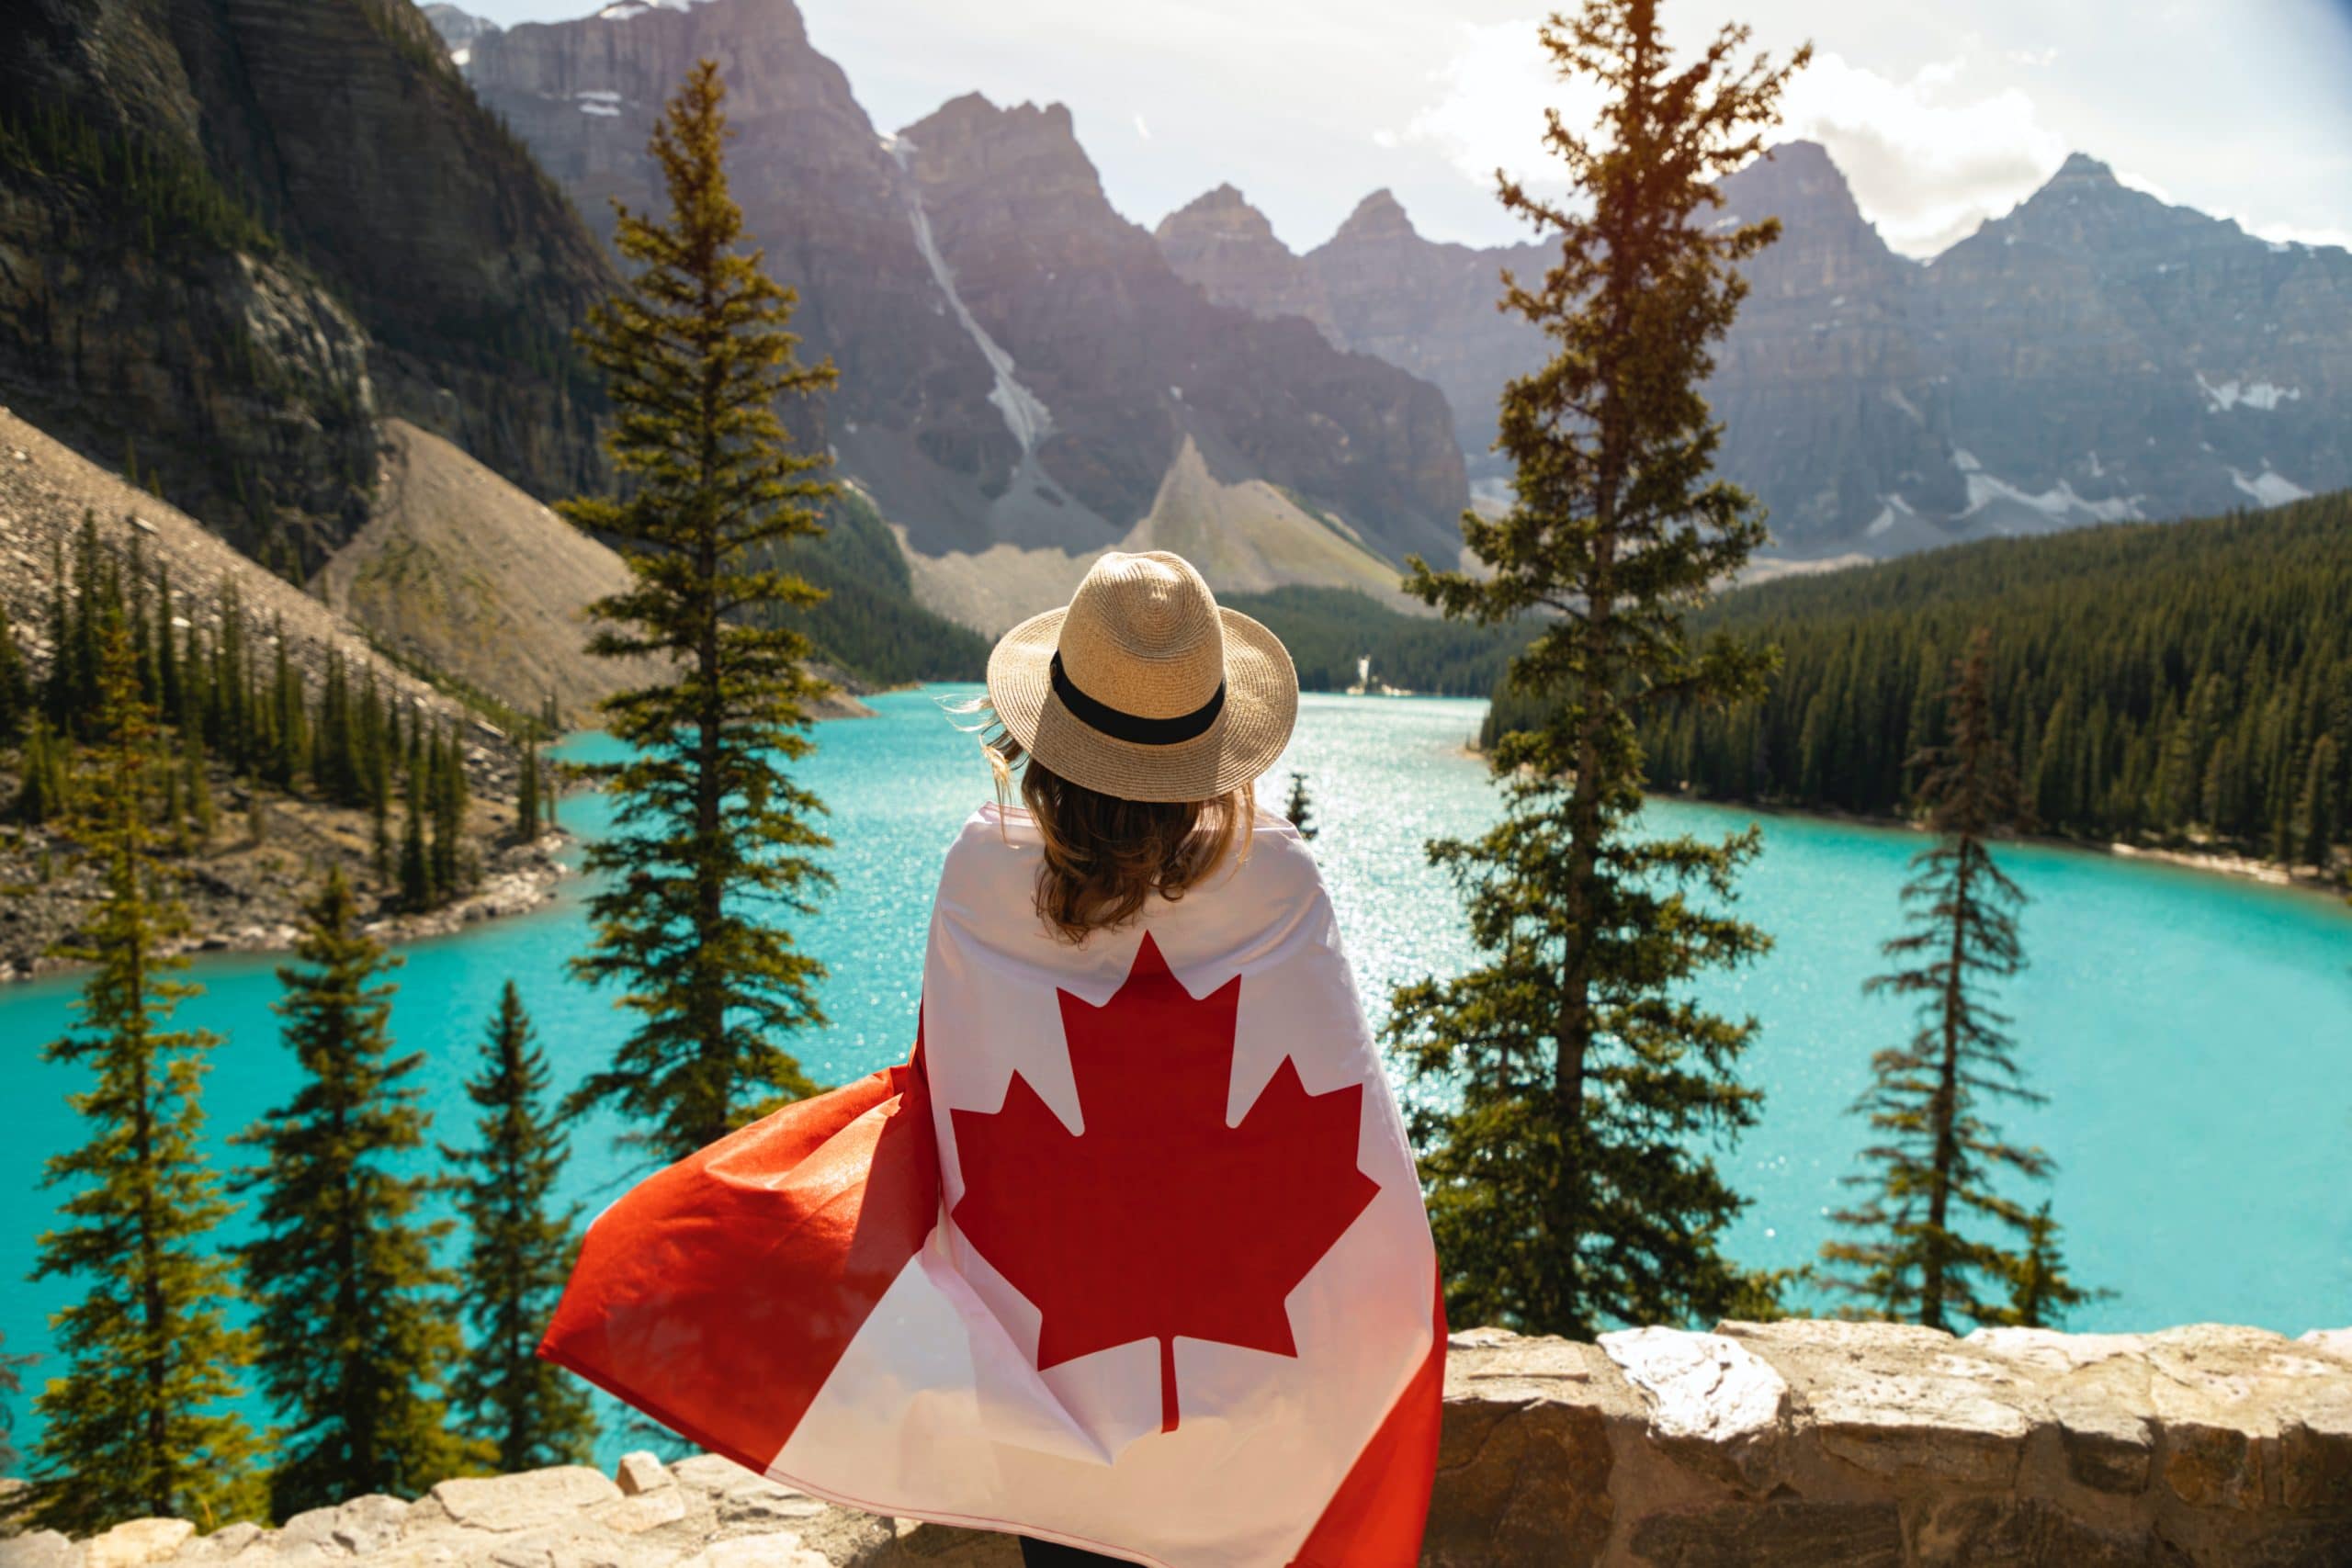 10 fun immigration facts about Canada | Canada Immigration News